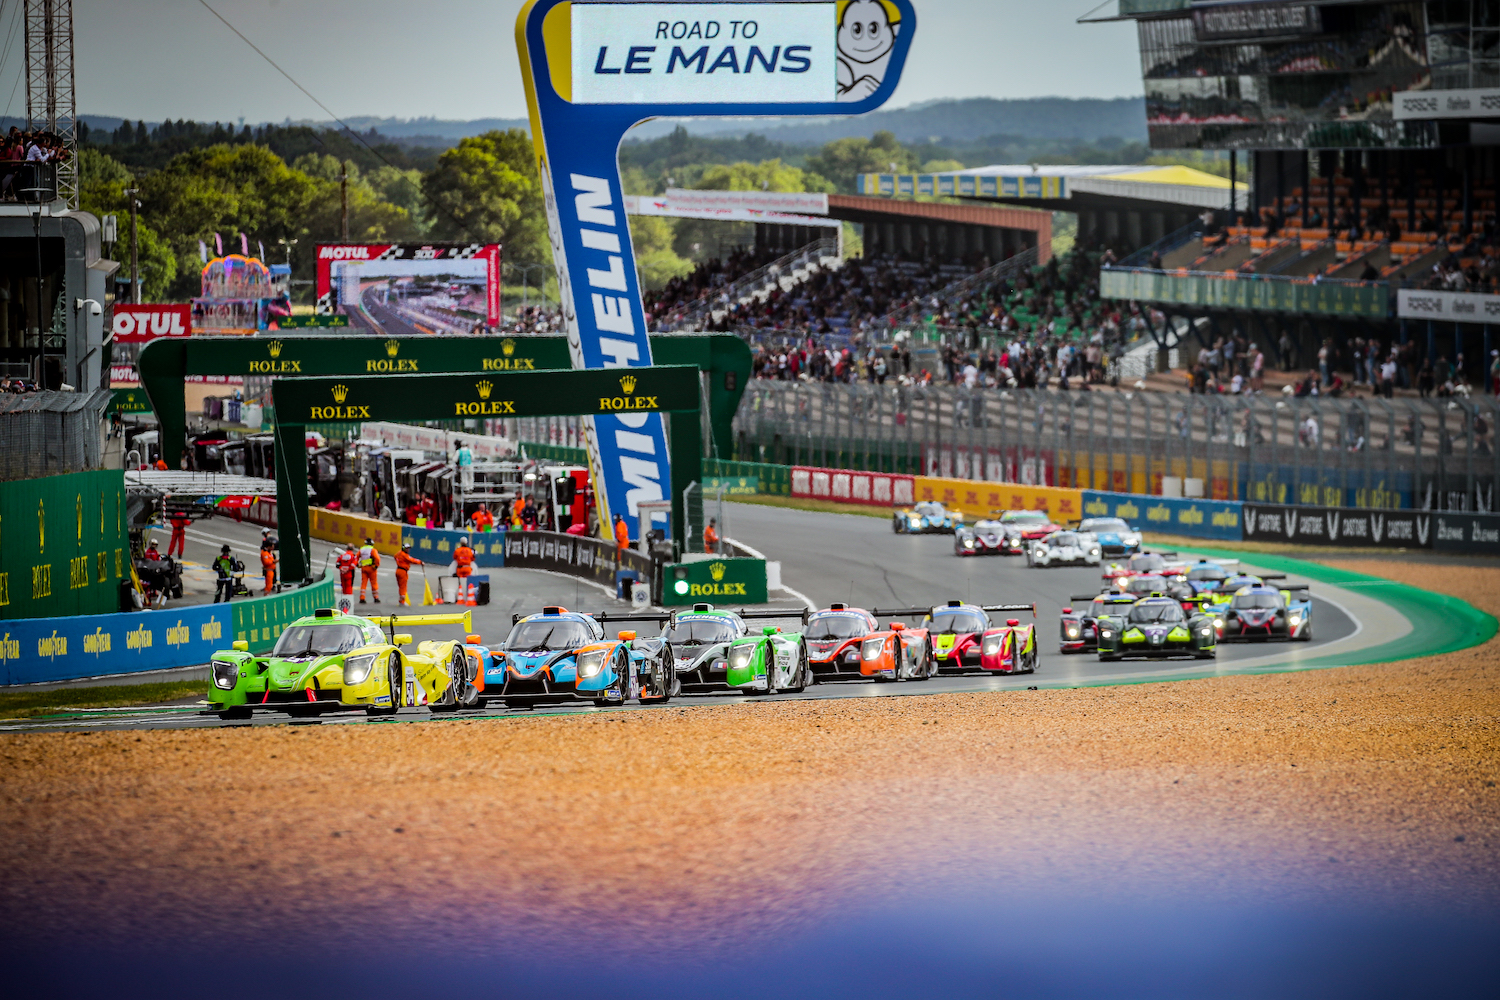 Road to Le Mans 2022